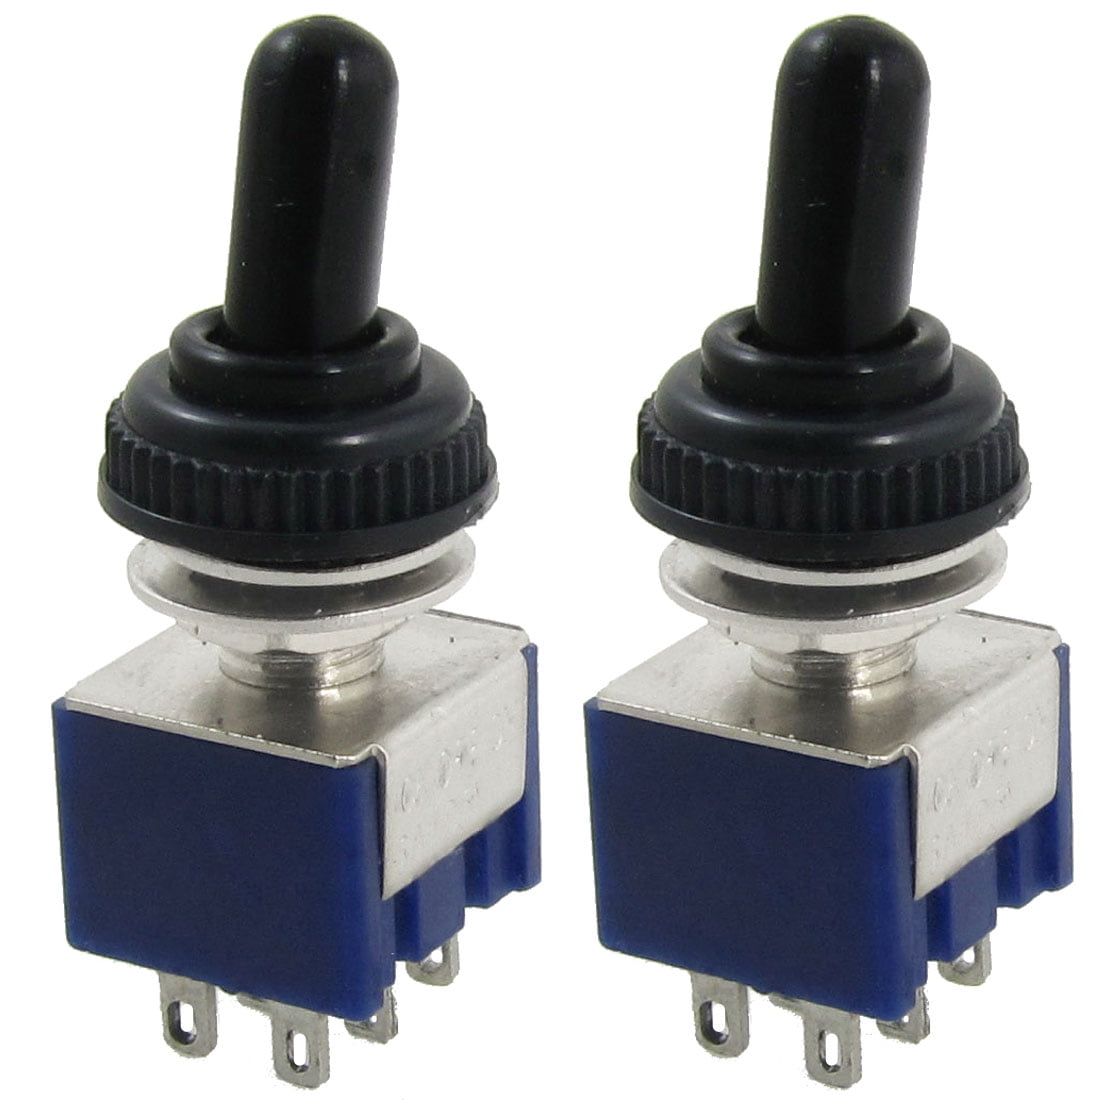 Waterproof Cover Cap SPDT ON/OFF/ON 3 Position Toggle Switch 2A/250VAC 5A/120V 